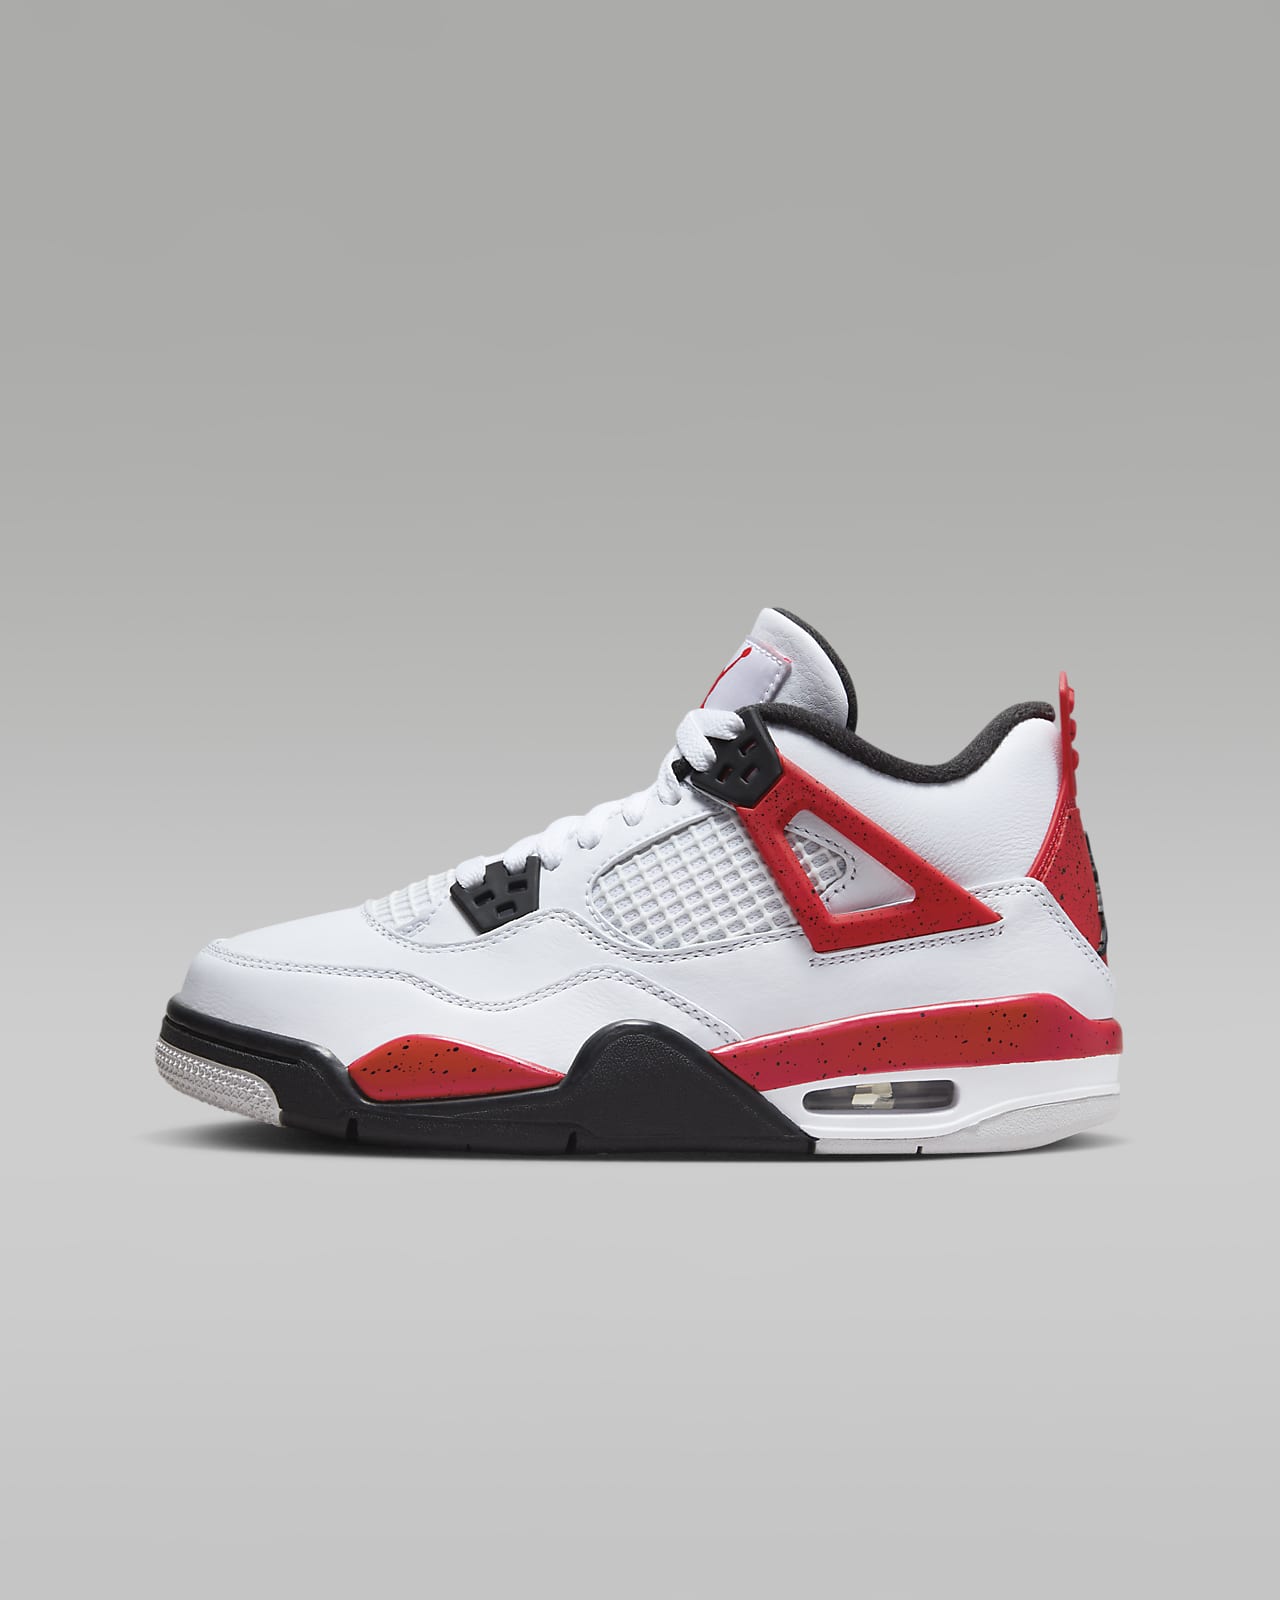 Best Look Yet at This Year's 'Fire Red' Air Jordan 4 Retro